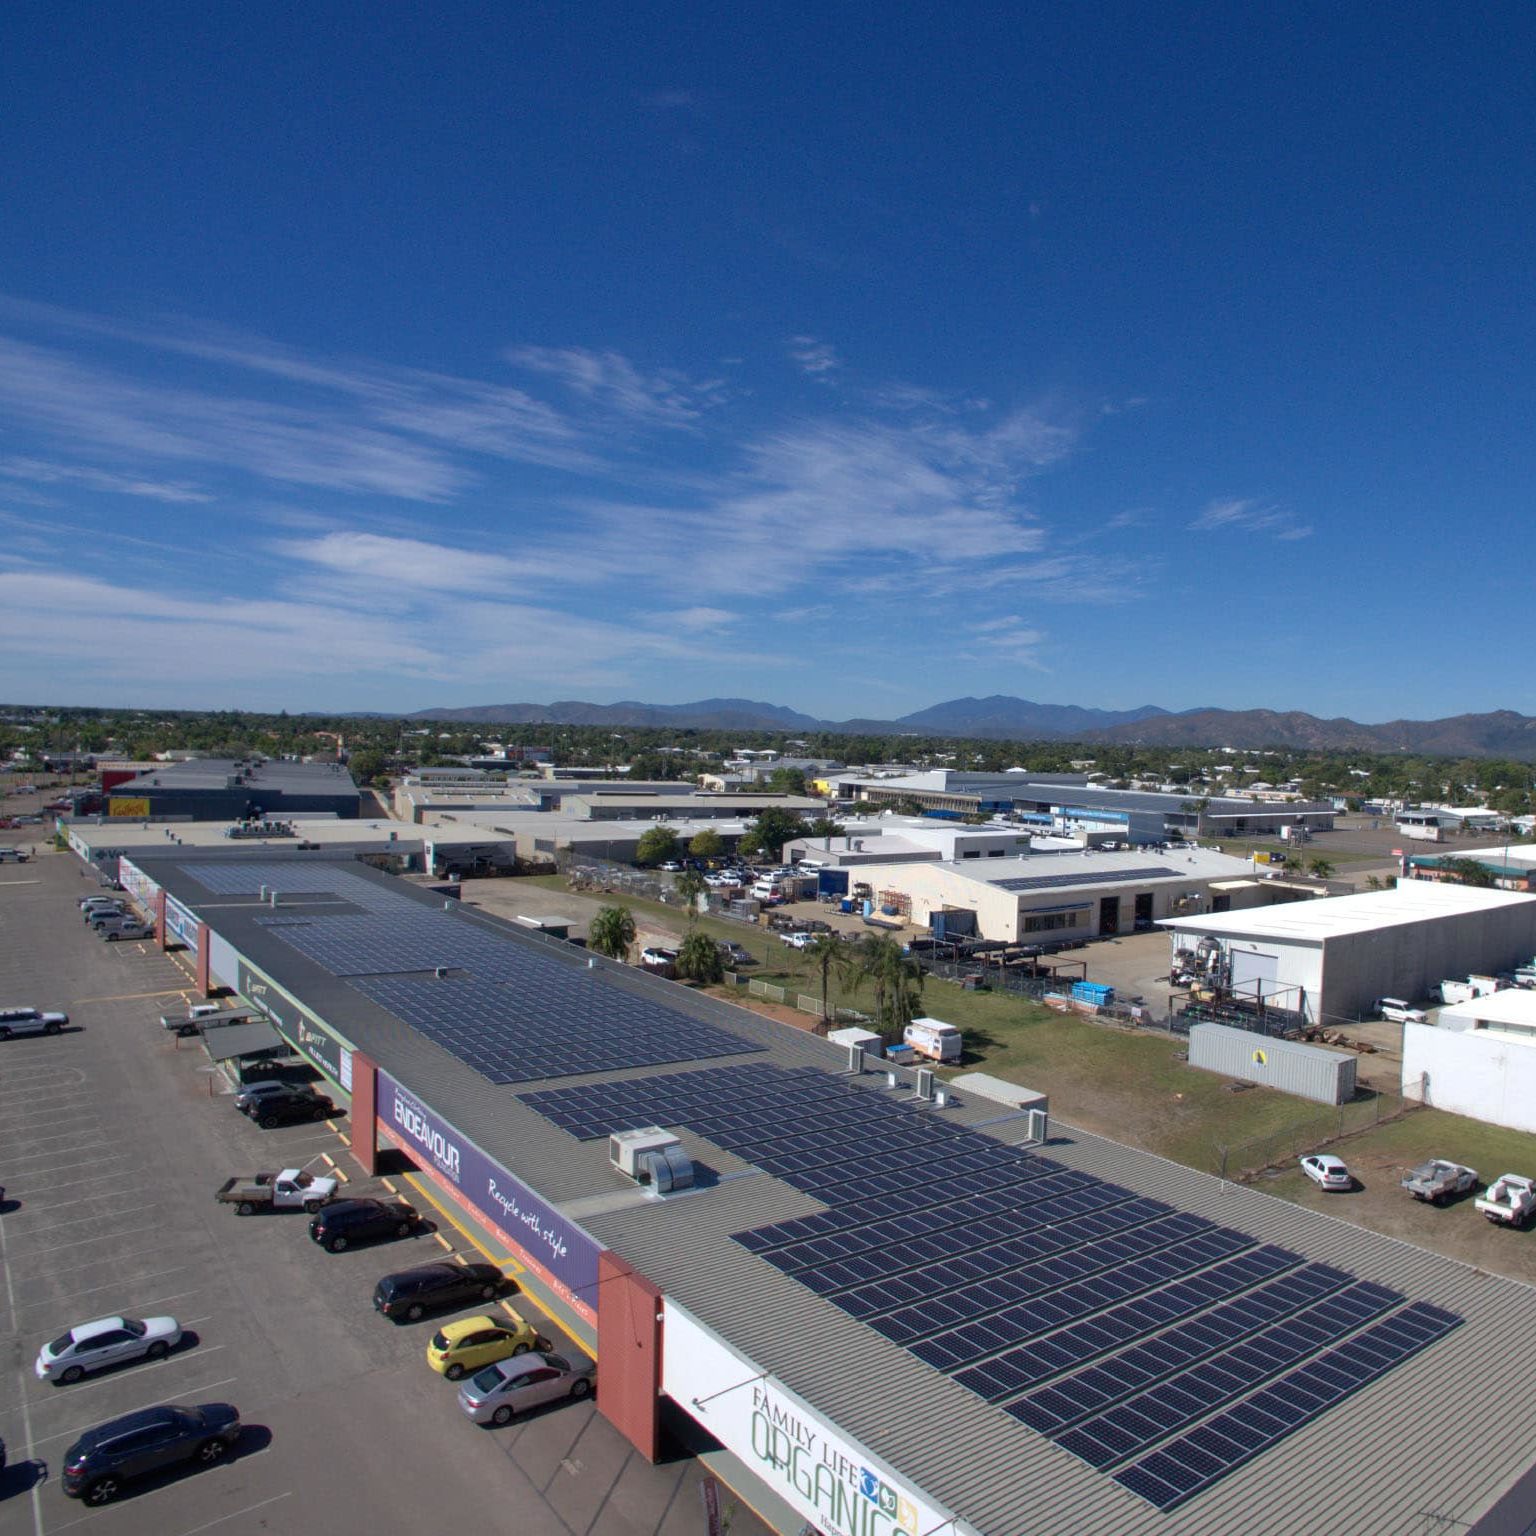 Aerial view of the Woolcock Street Centre showing the solar panel installation and panels totalling 300kW